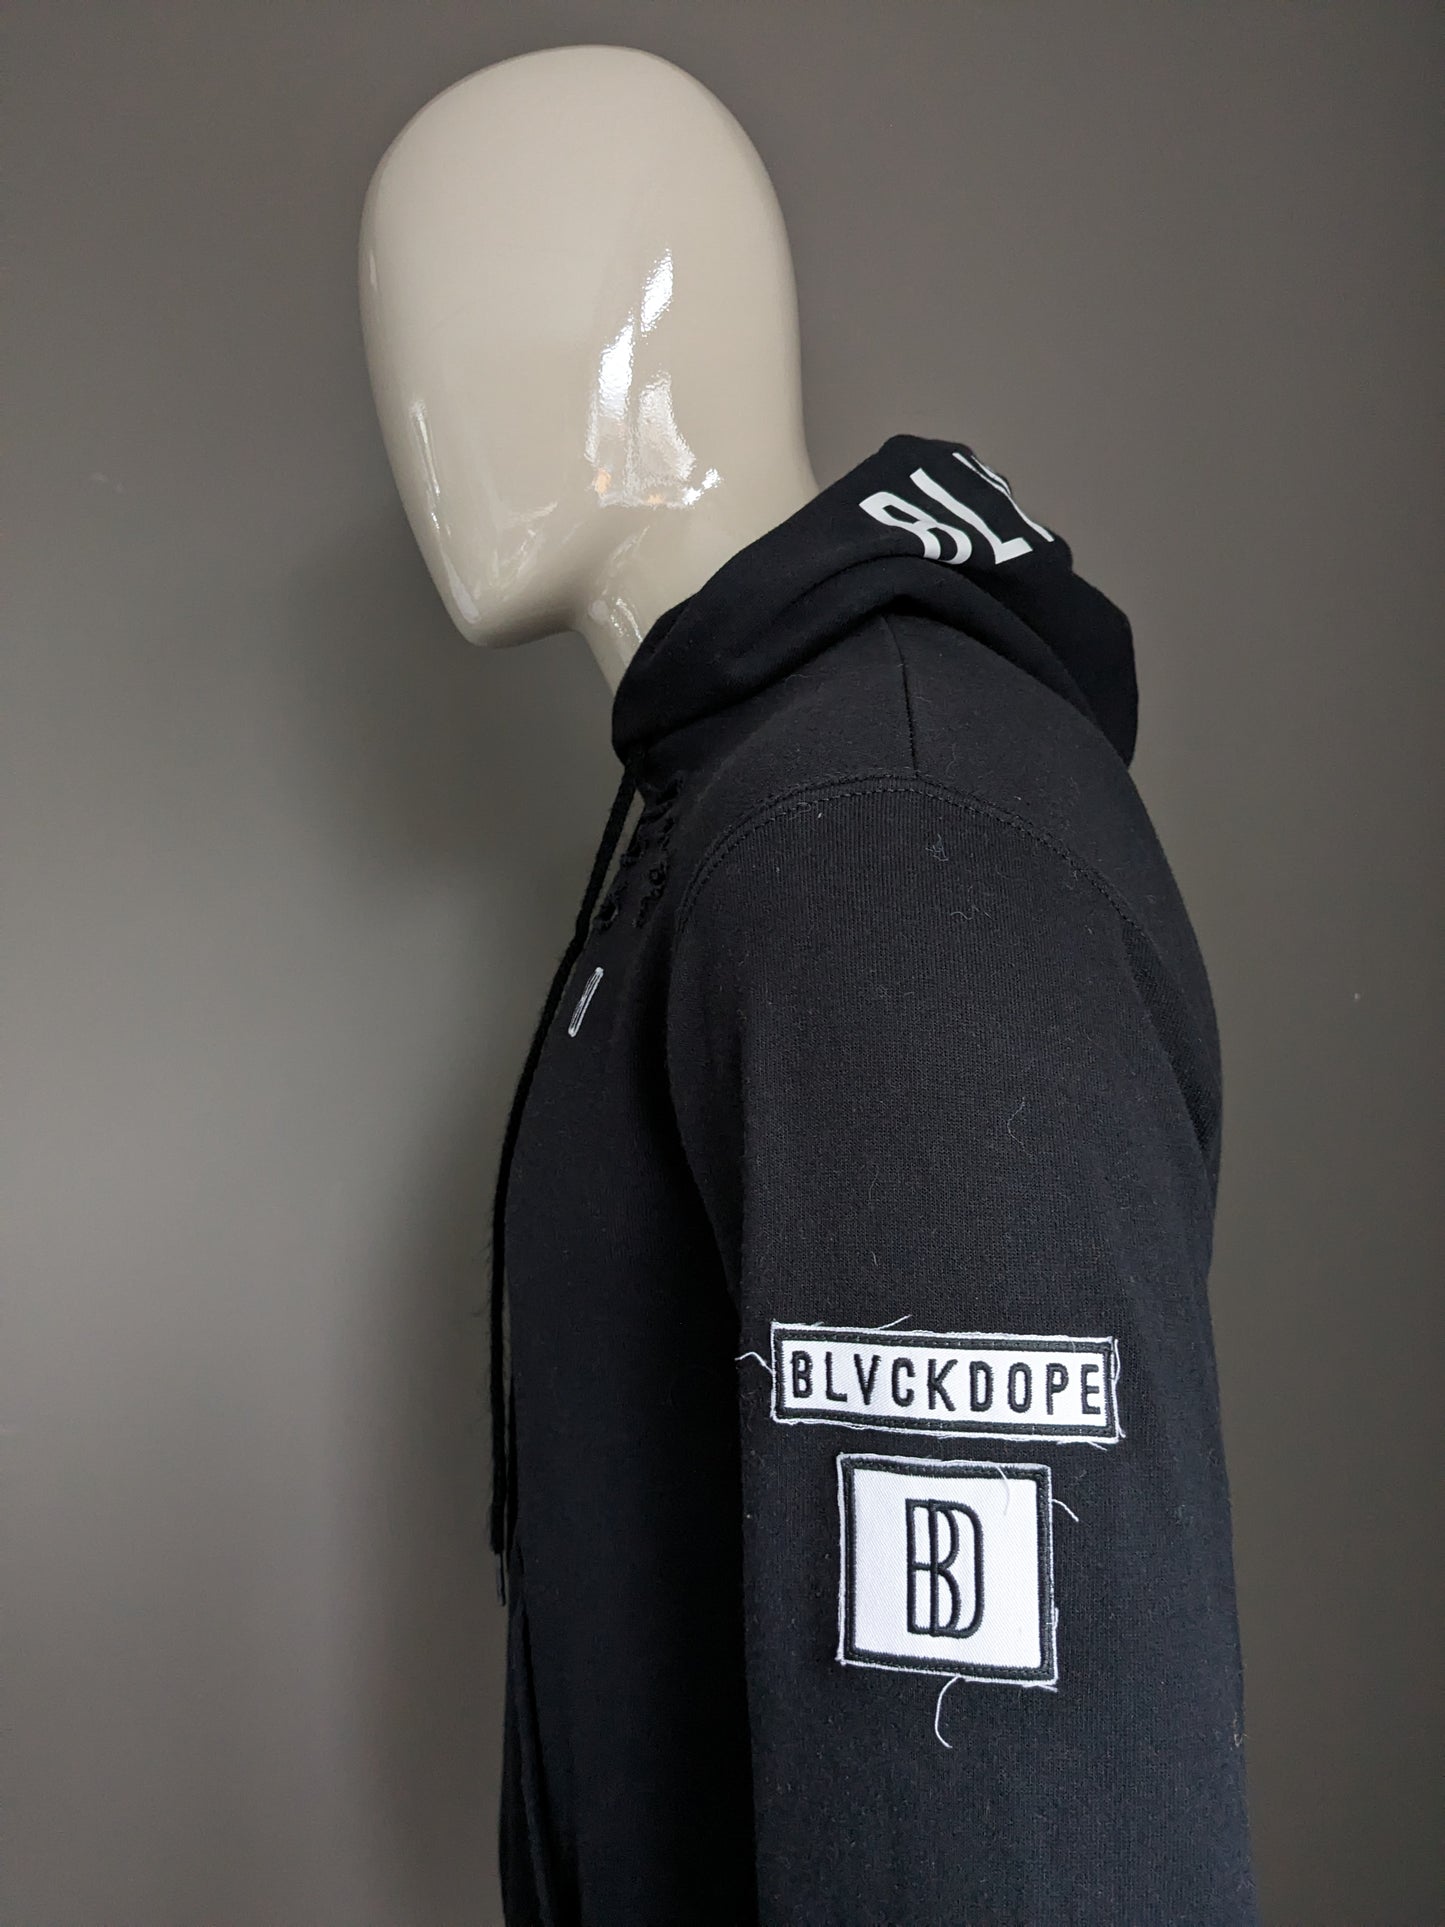 Blvckdope hoodie. Black with decorative holes and applications. Size S.